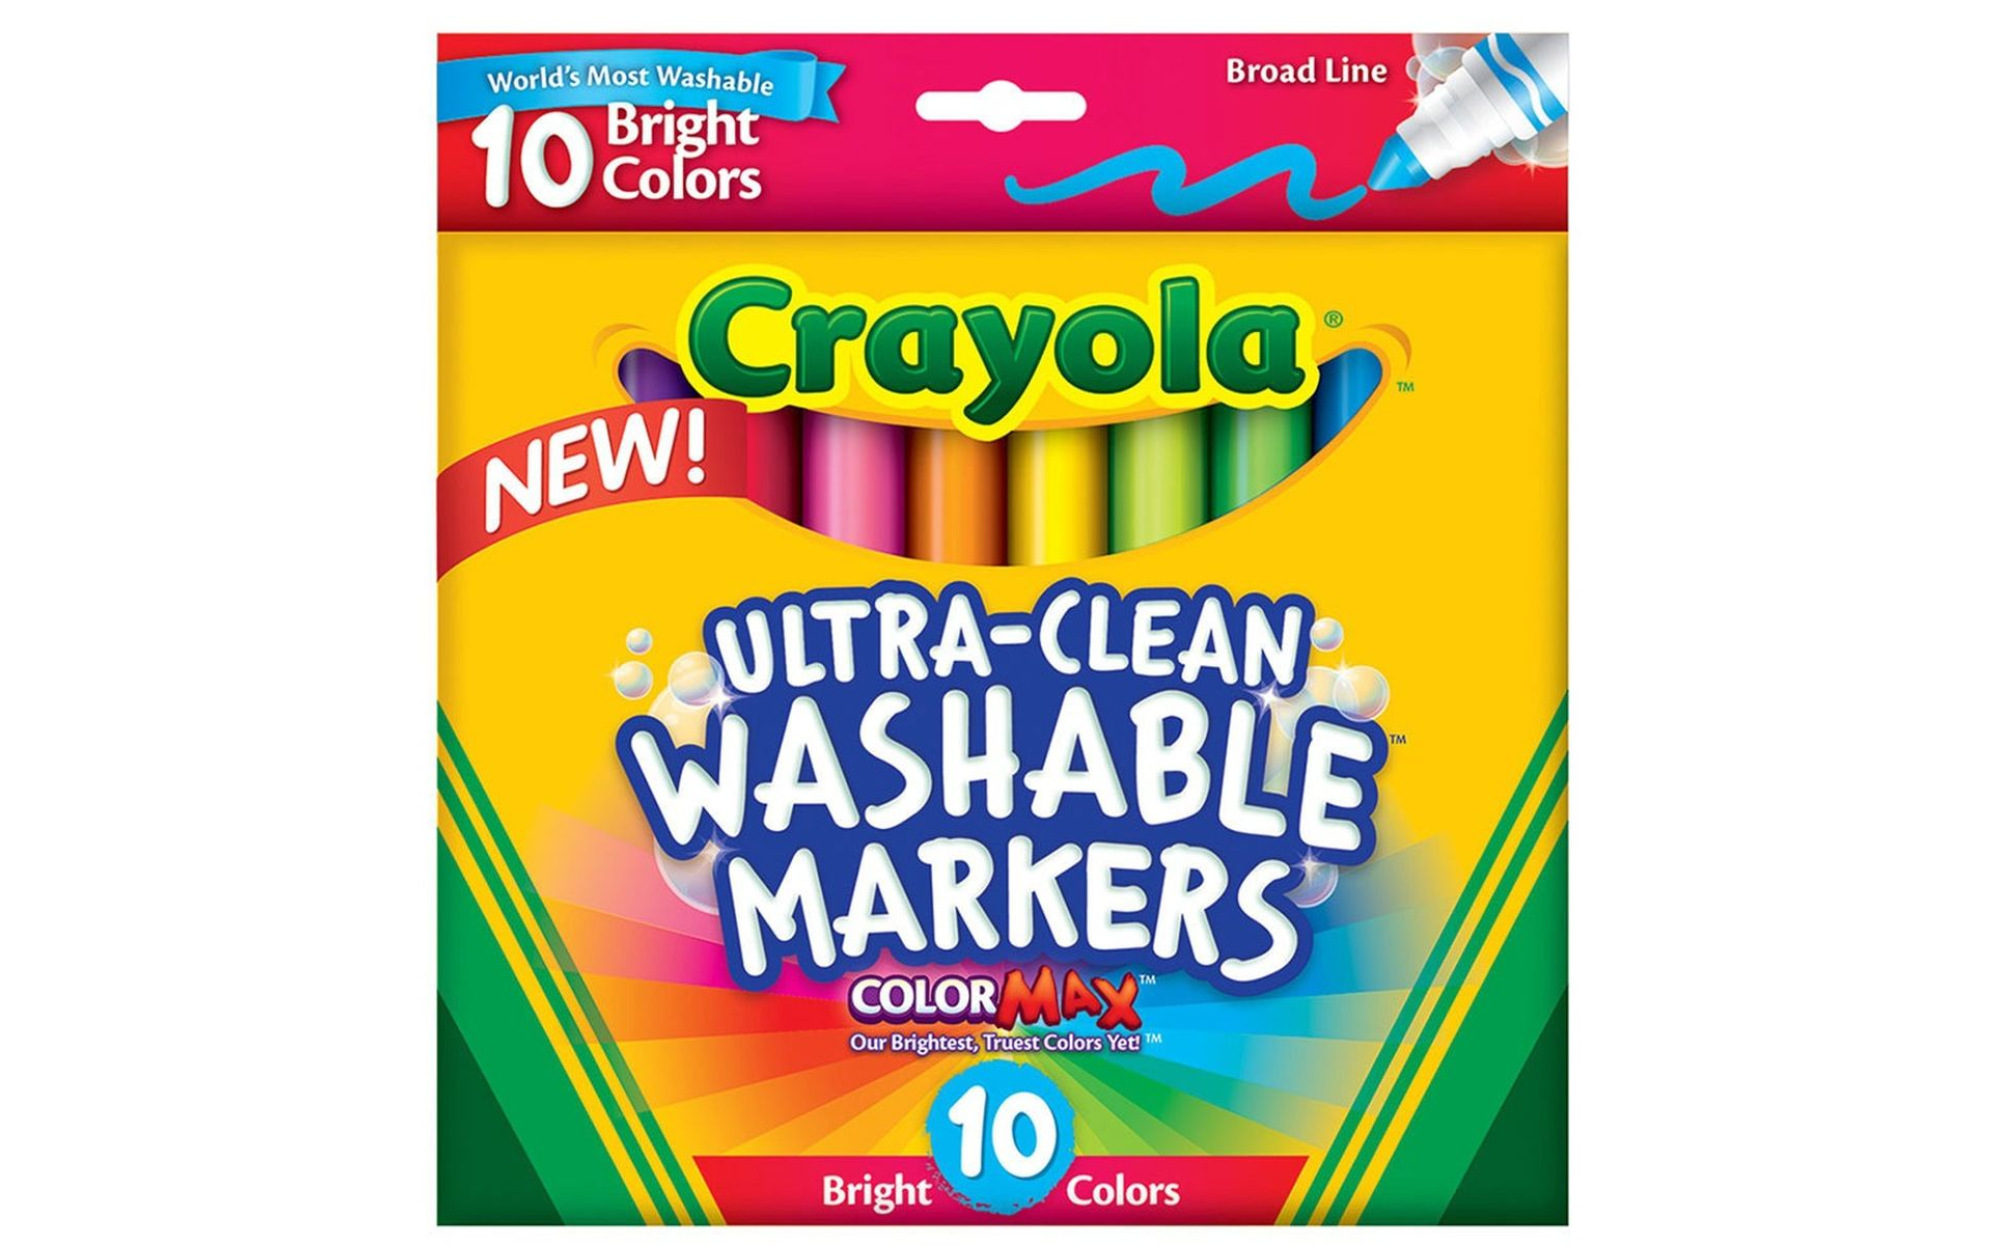 Faber-Castell Duo Tip Washable Markers - 12 count